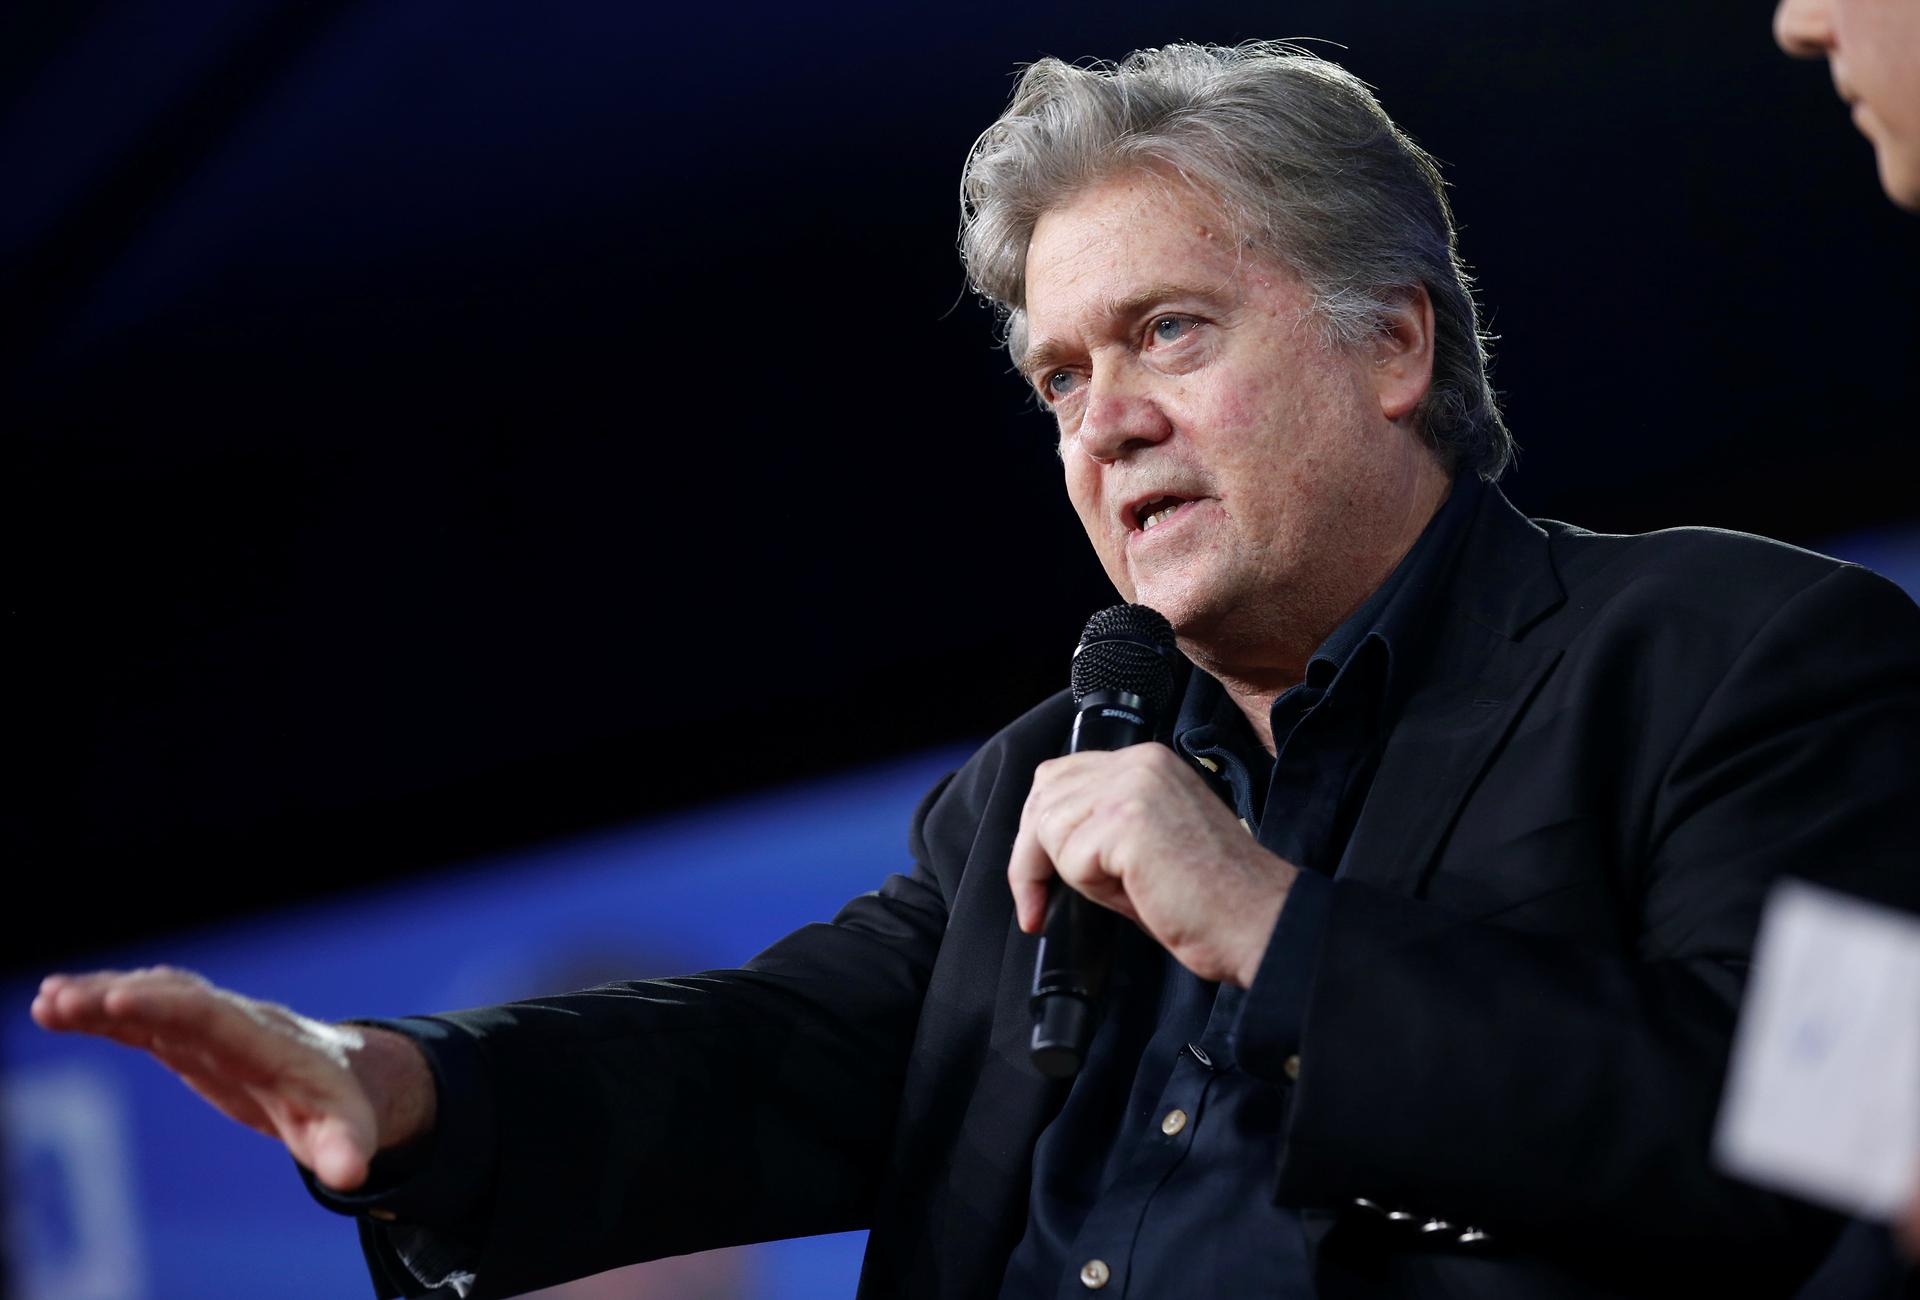 White House Chief Strategist Stephen Bannon speaks at the Conservative Political Action Conference (CPAC) in National Harbor, Maryland, February 23, 2017.